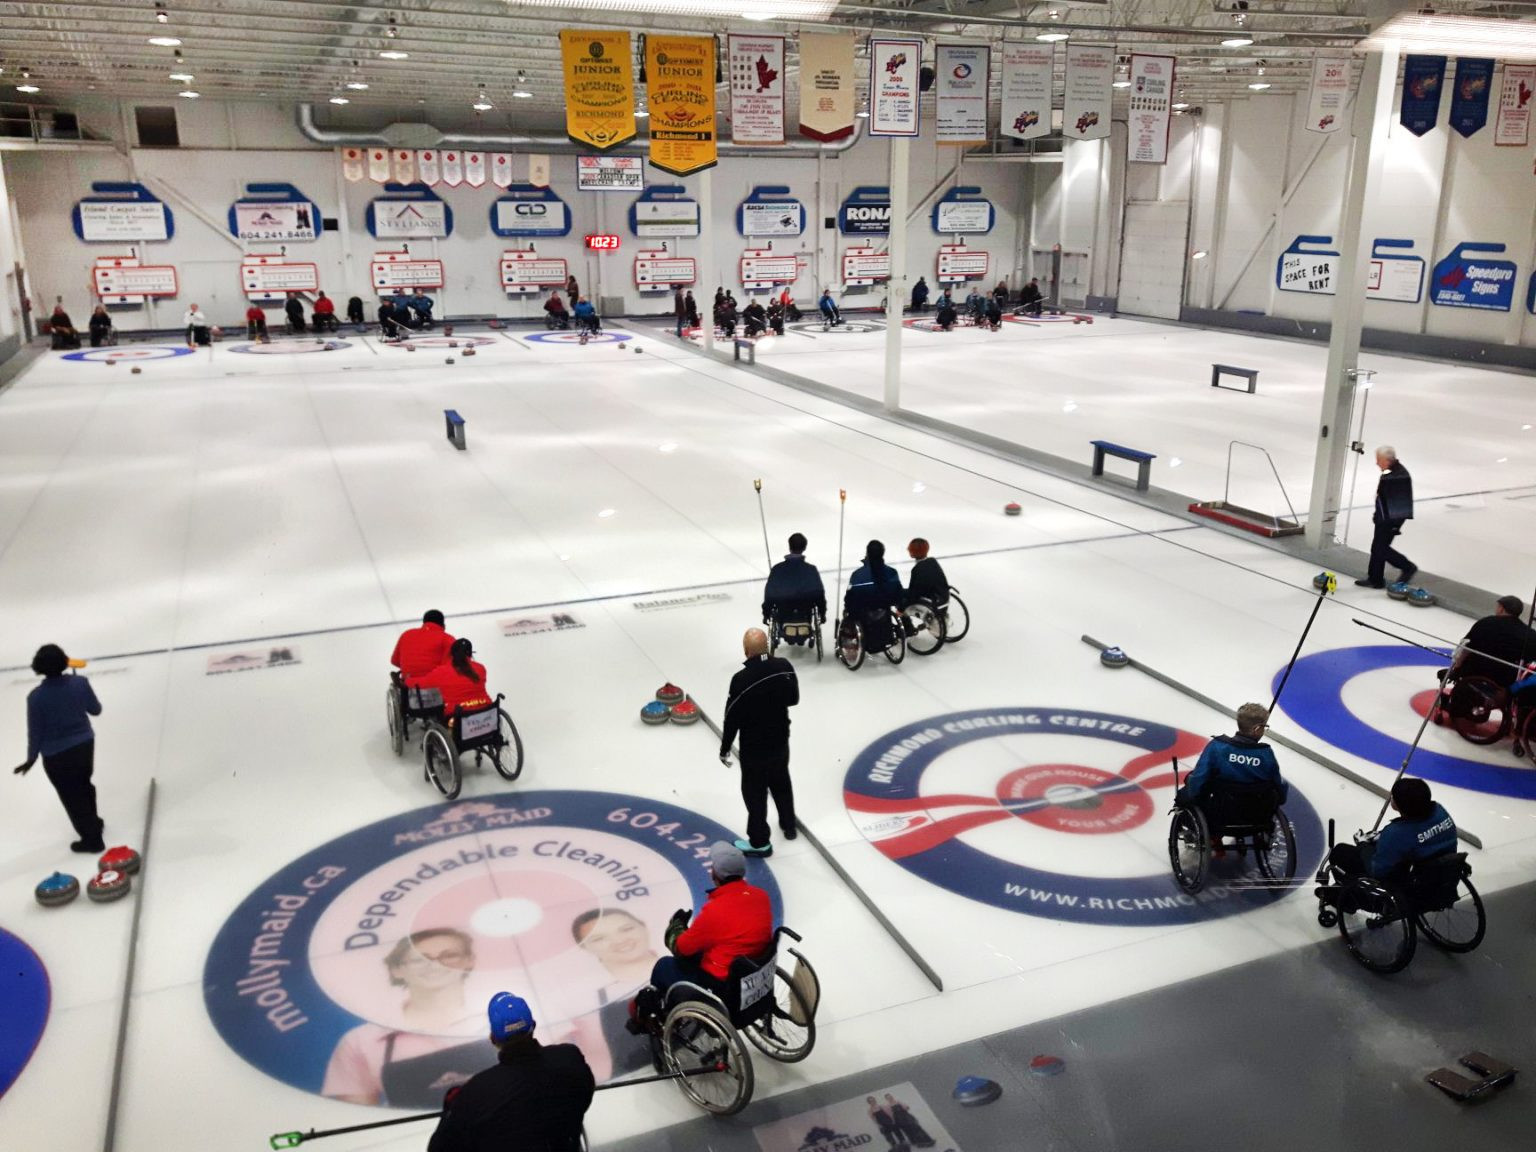 The Richmond Curling Centre in Canada will host next year's World Wheelchair Curling Championship and World Wheelchair Mixed Doubles Curling Championship ©World Curling